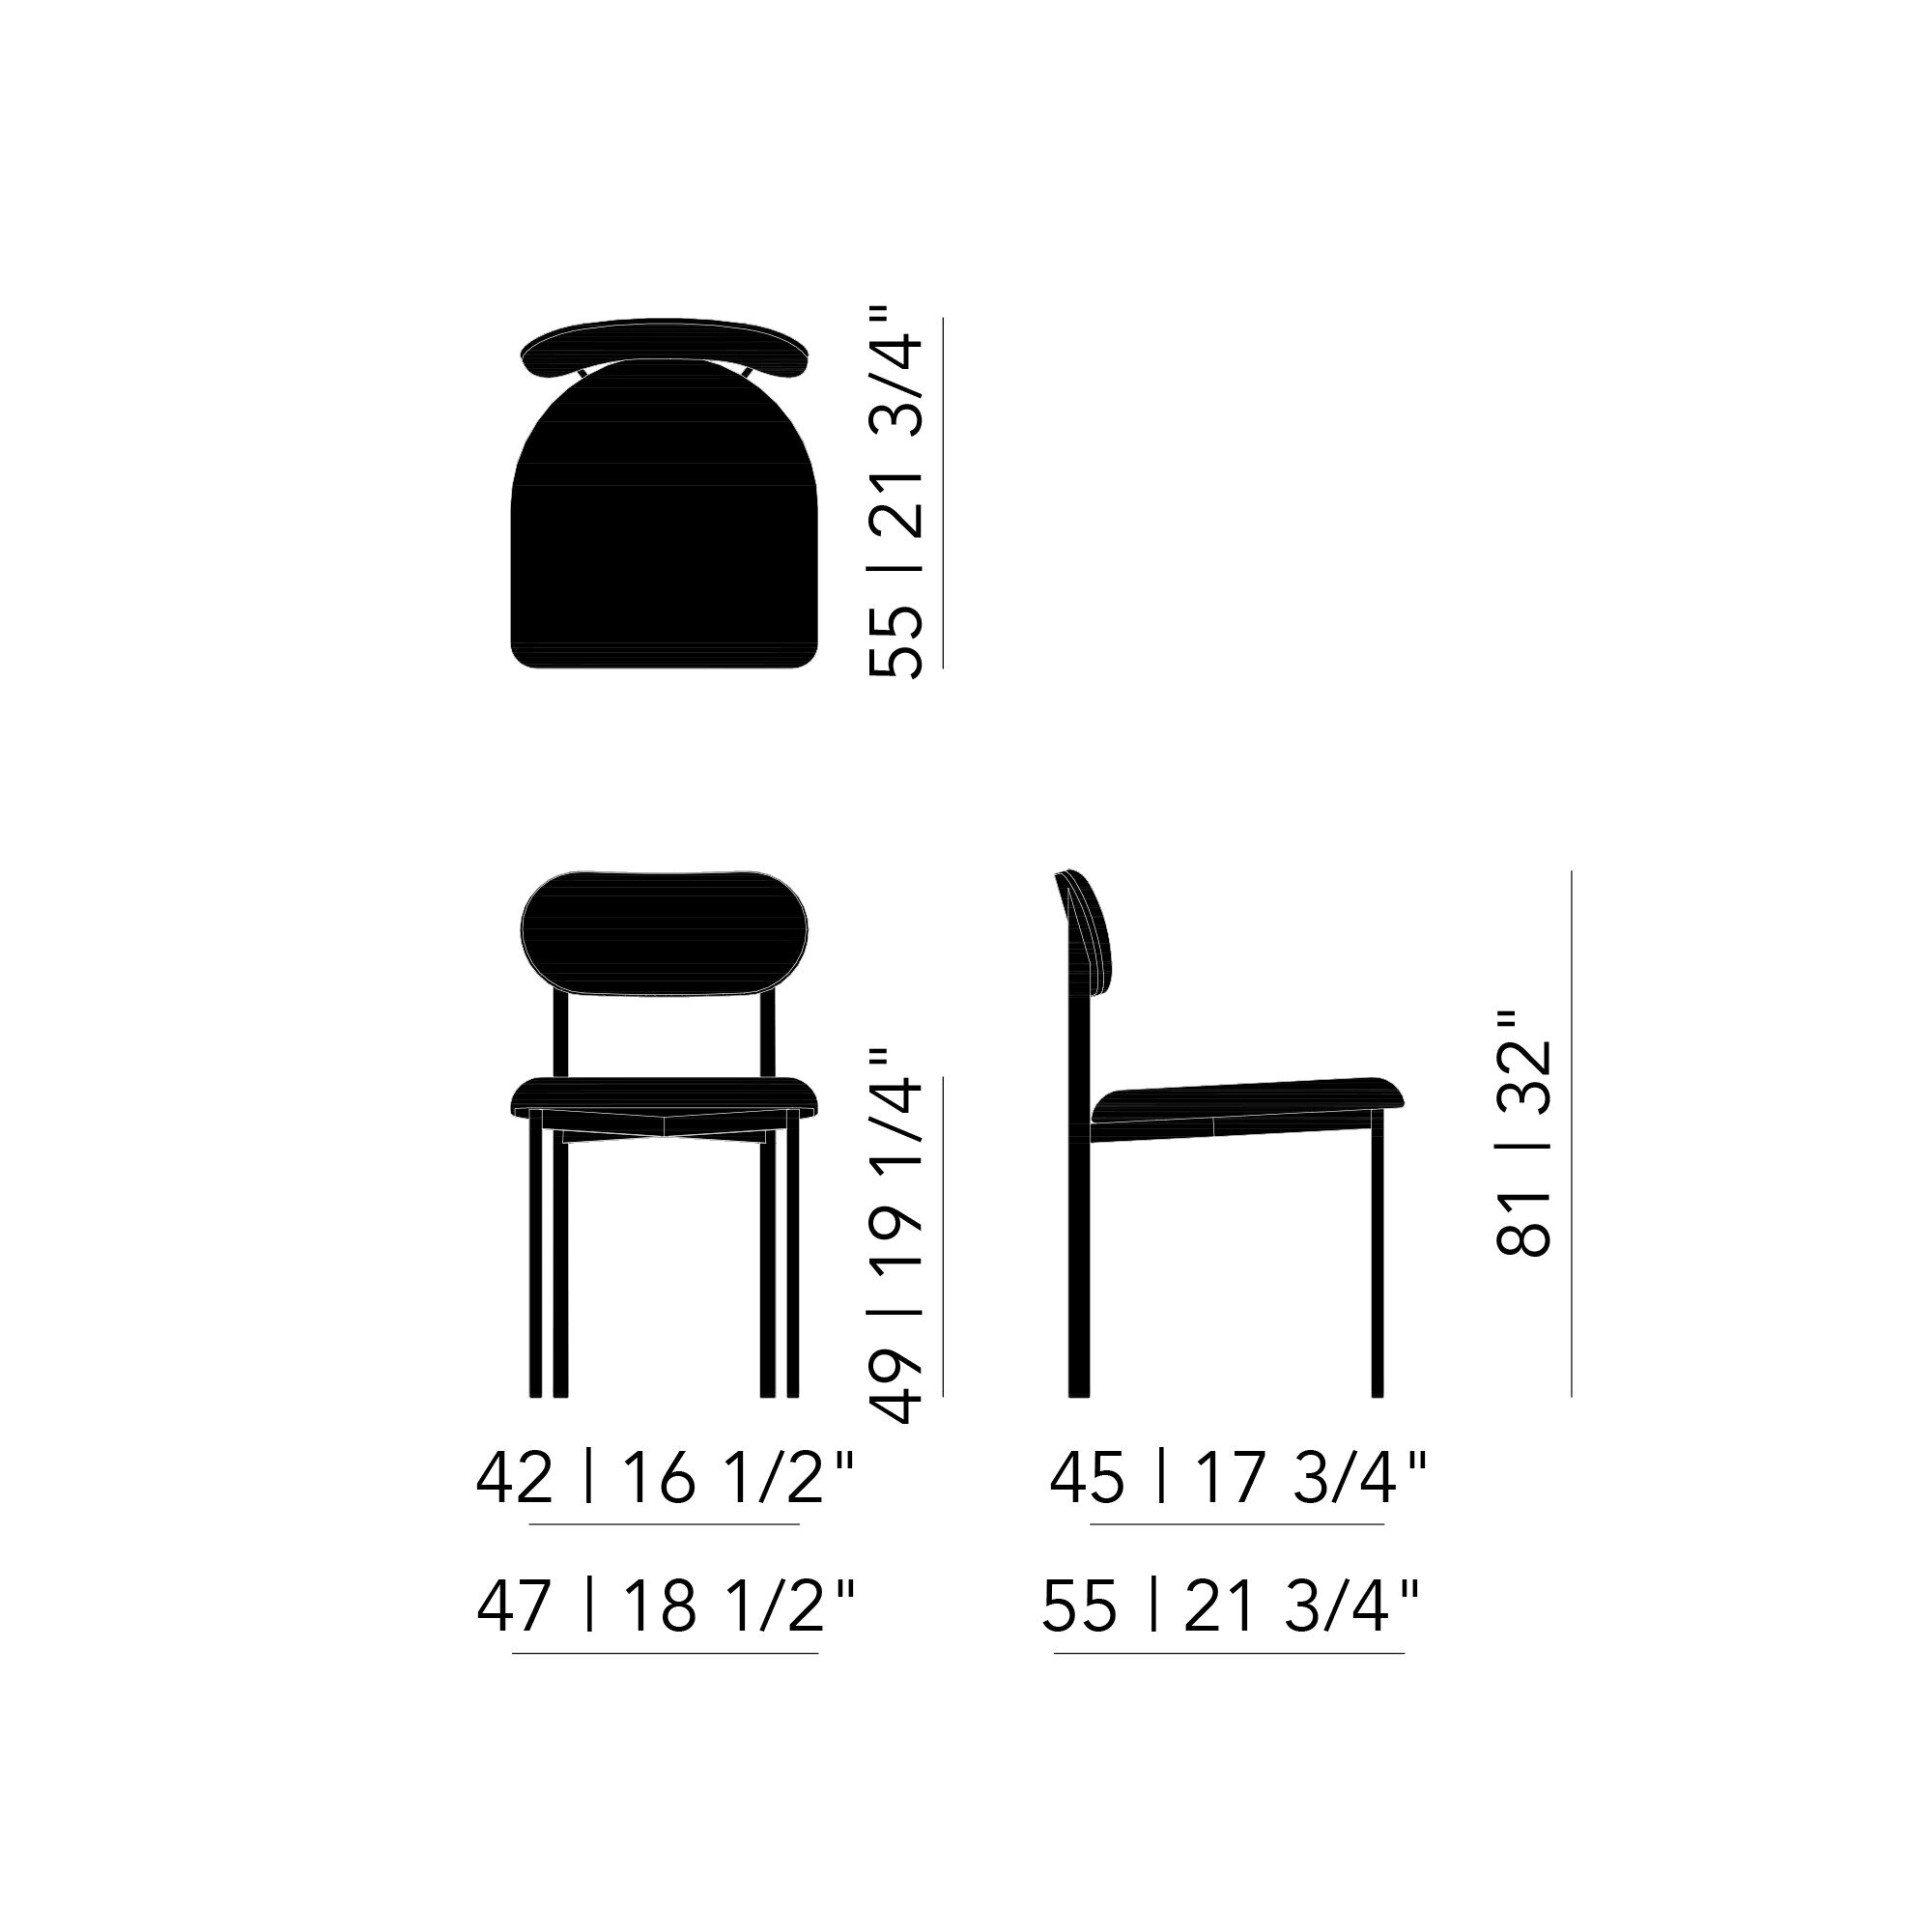 Design modern dining chair | Oblique Dining Chair upholstered  orion wood108 | Studio HENK| 